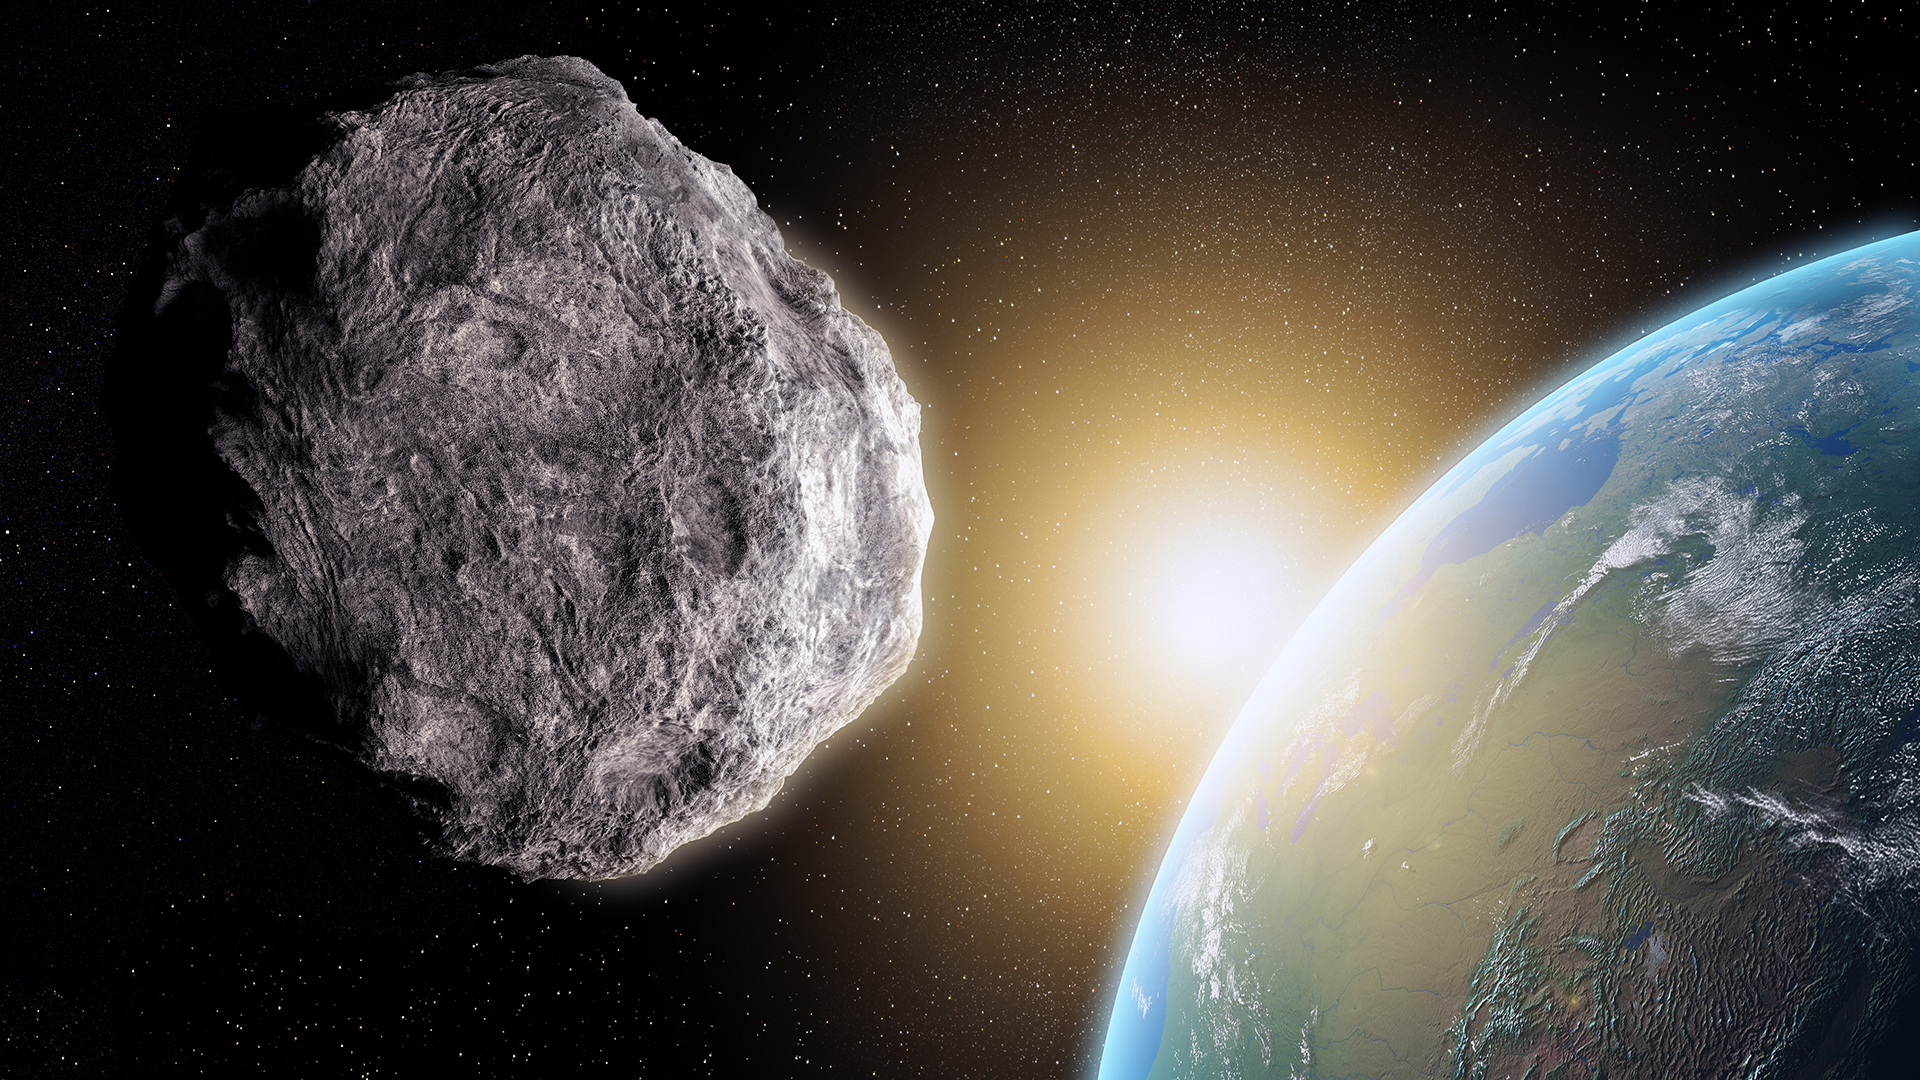 Skyscraper-size asteroid will blaze past Earth in a close approach this Sunday thumbnail